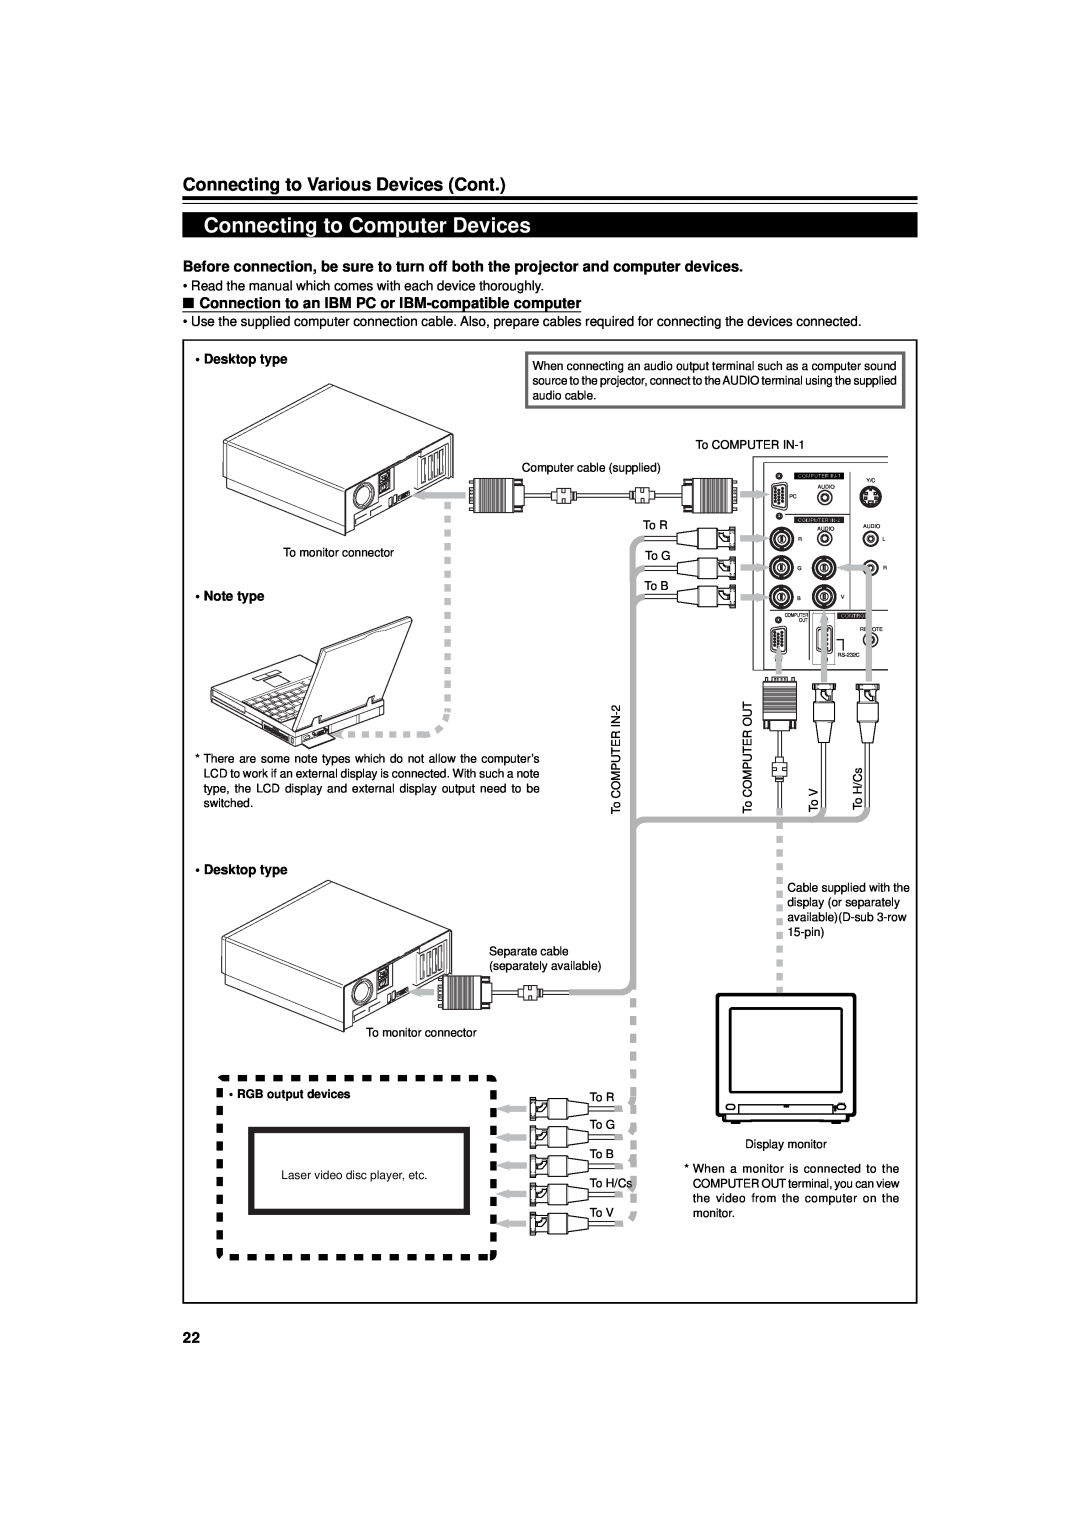 JVC DLA-G15U manual Connecting to Computer Devices, Connecting to Various Devices Cont, Desktop type, Note type 